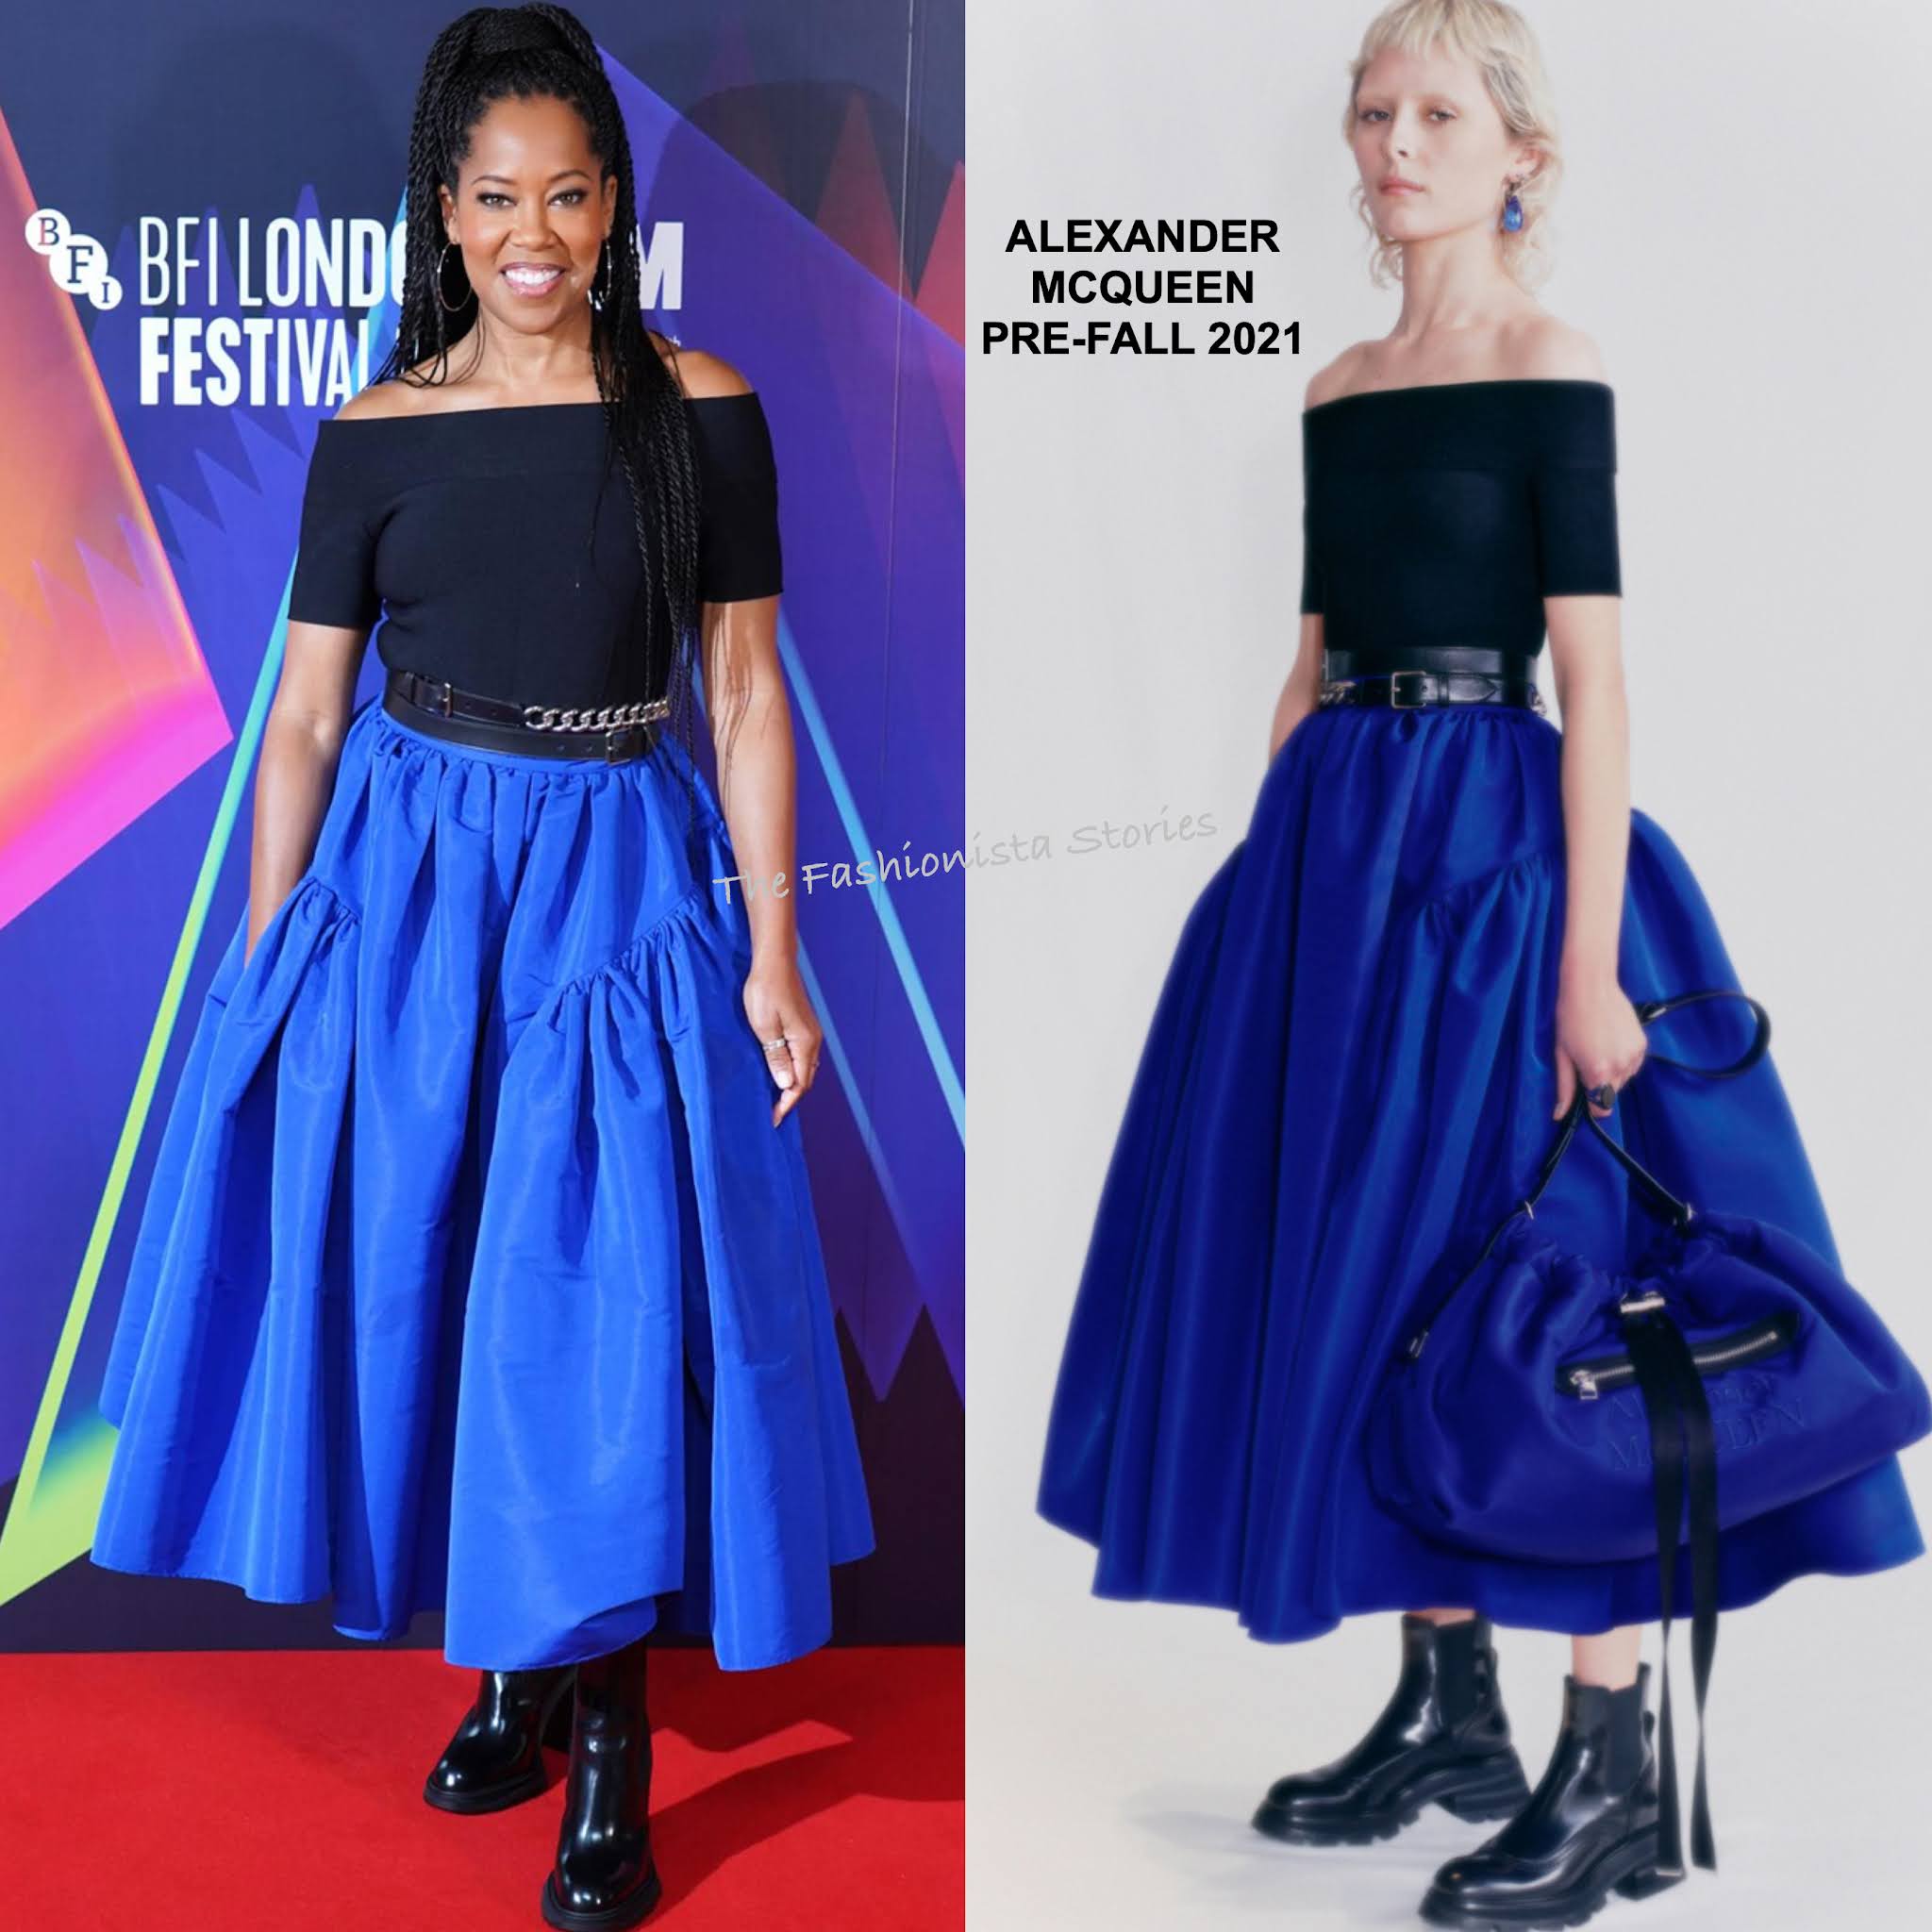 Regina King Wore Louis Vuitton & Alexander McQueen To 'The Harder They  Fall' London Film Festival Premiere & Photocall